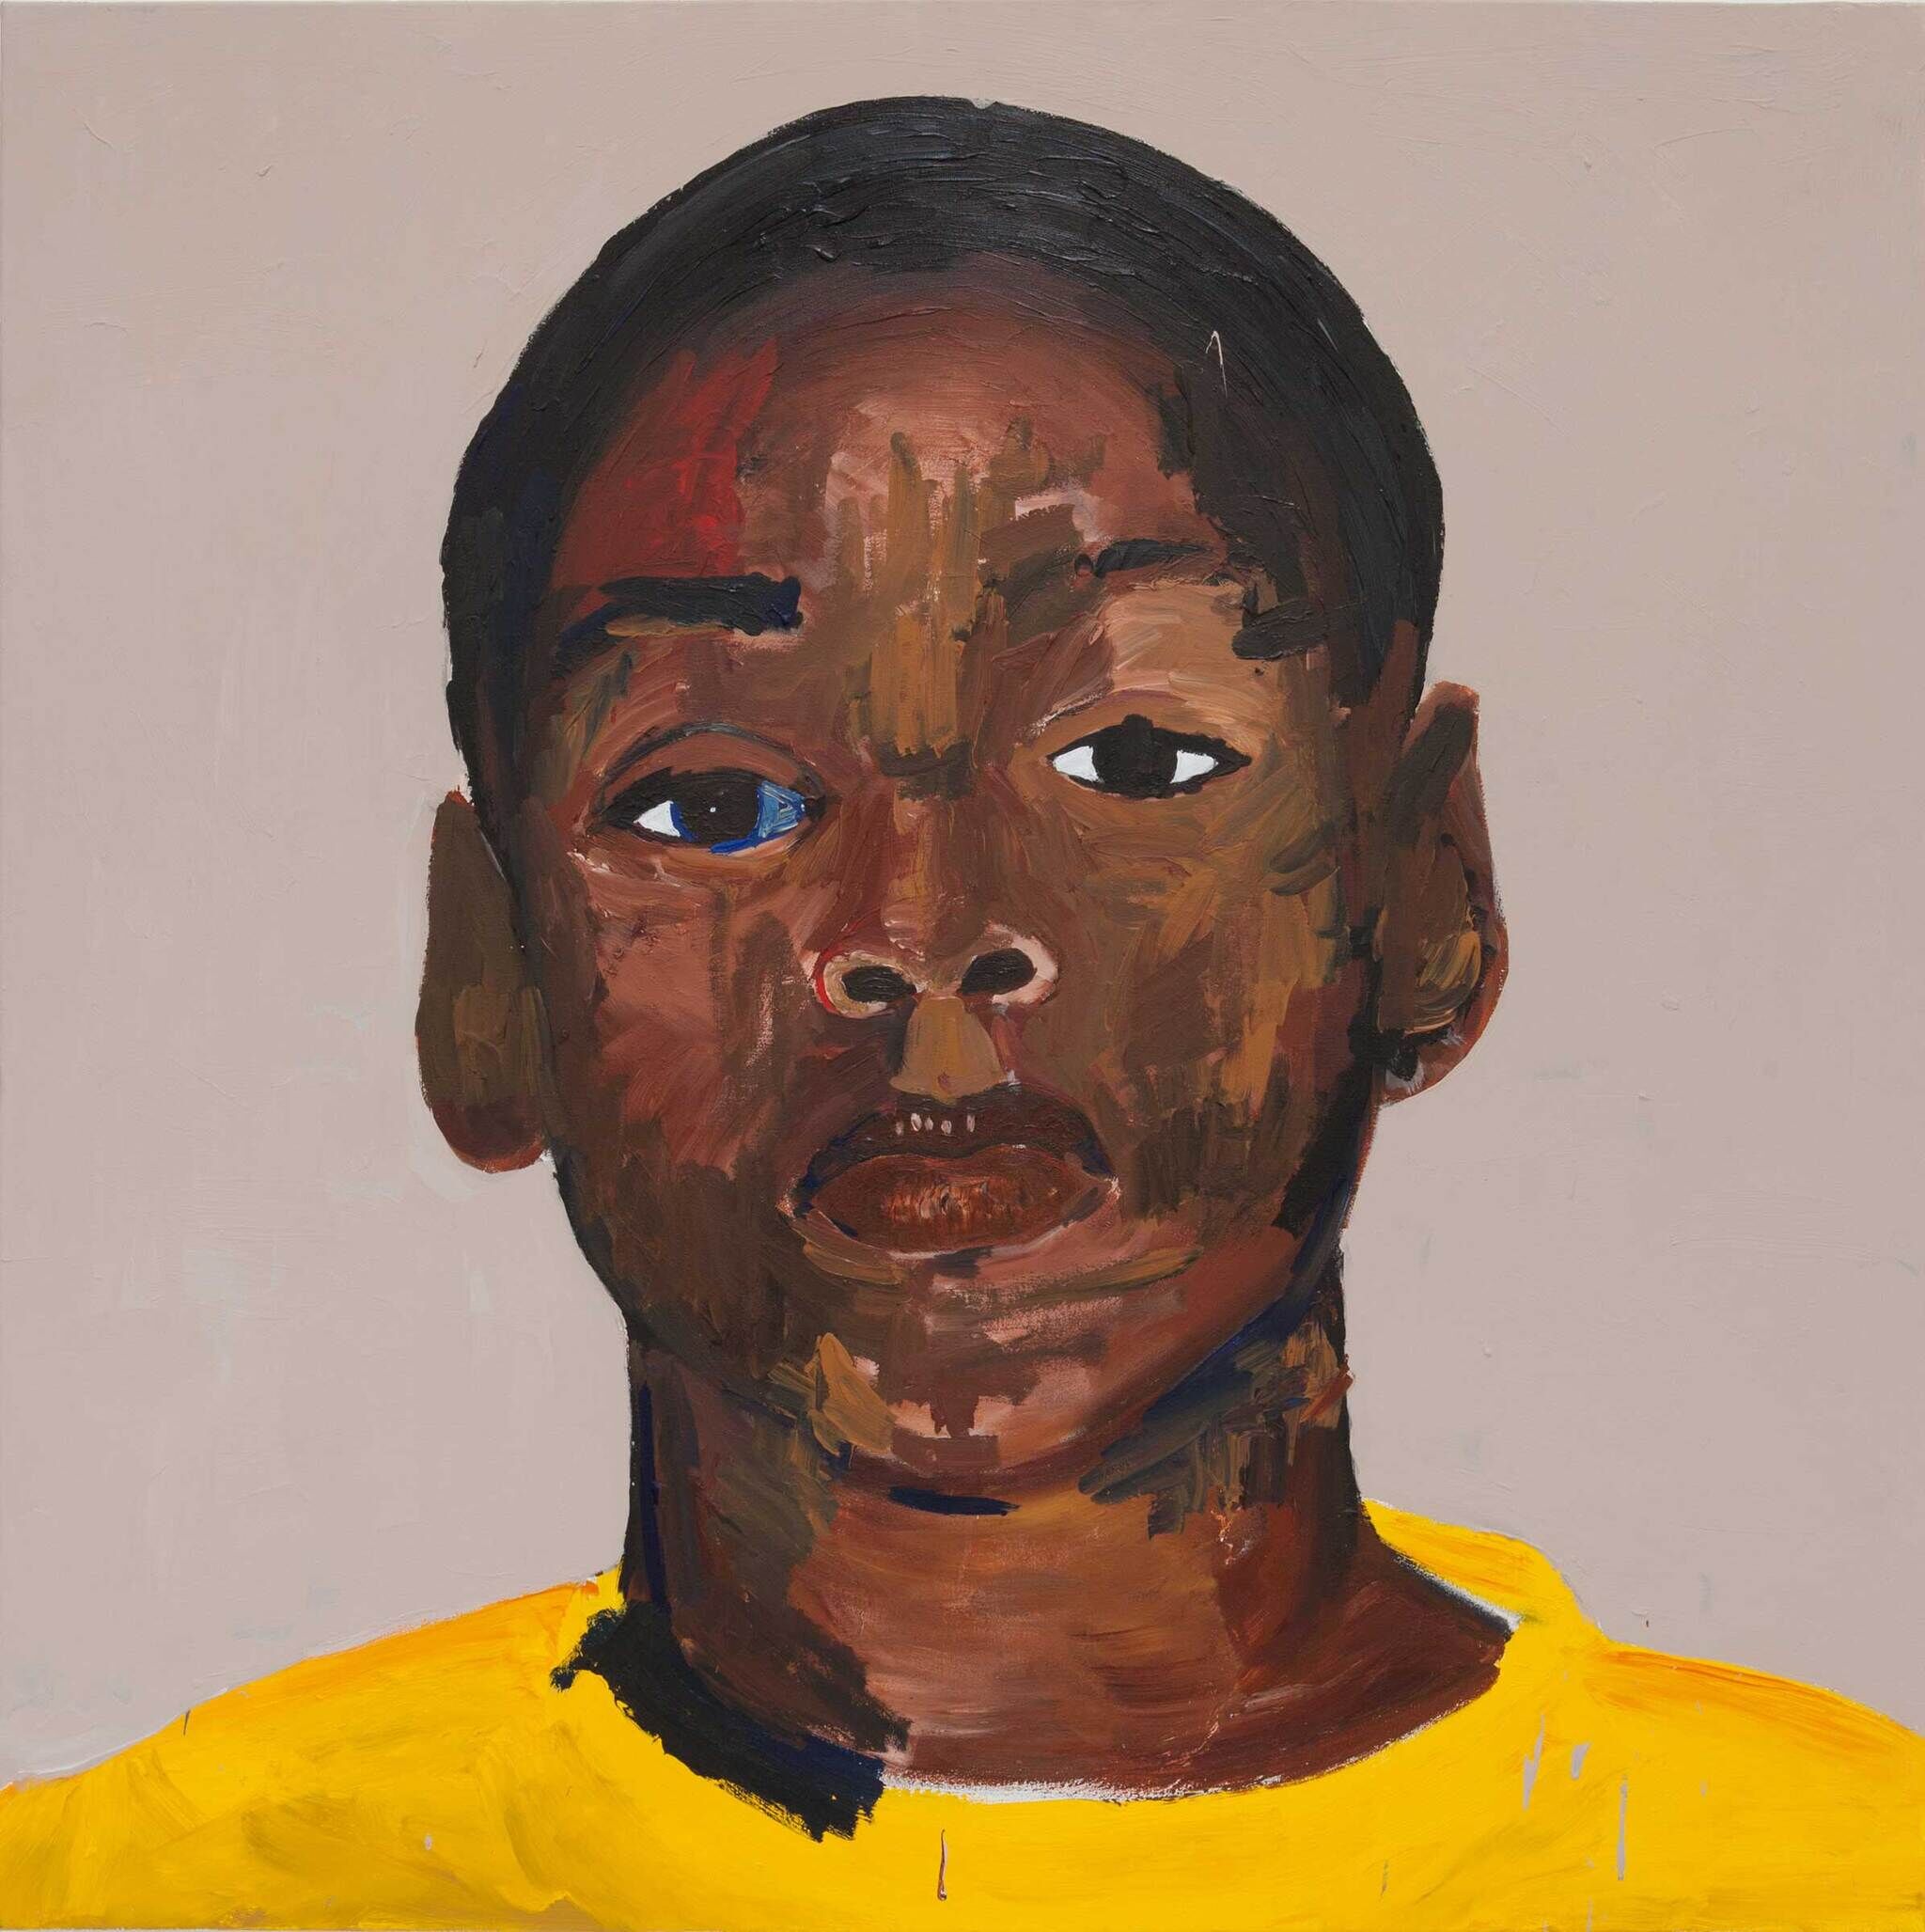 A closeup portrait of a Black boy wearing a bright yellow t-shirt. The background is a warm grey color.